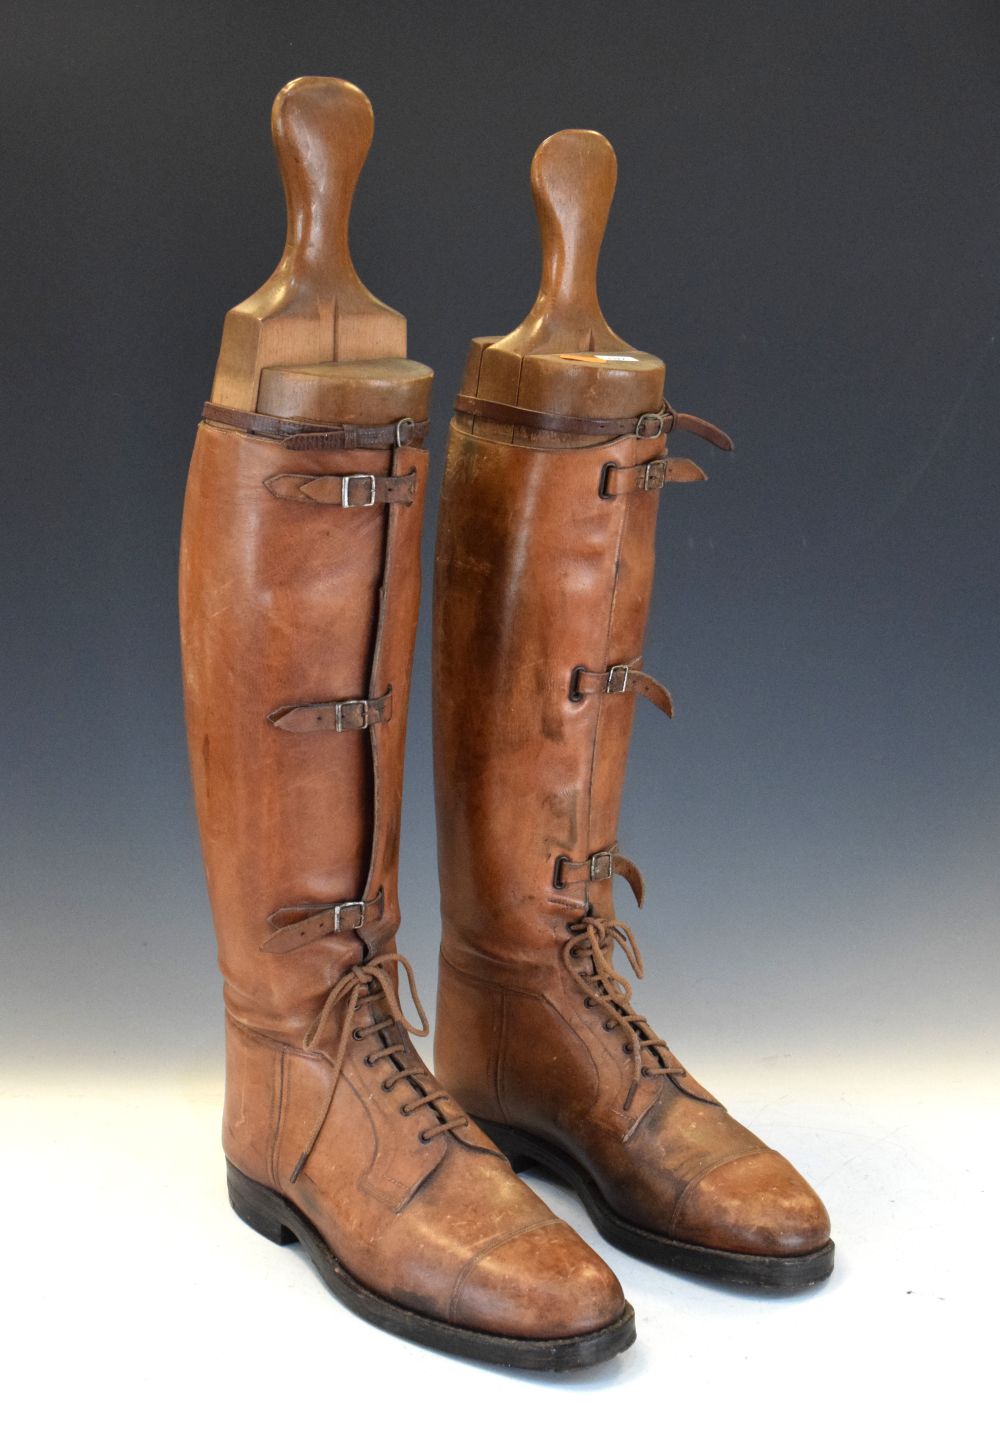 Pair of vintage brown leather riding boots with trees Condition: Scratches and wear to the